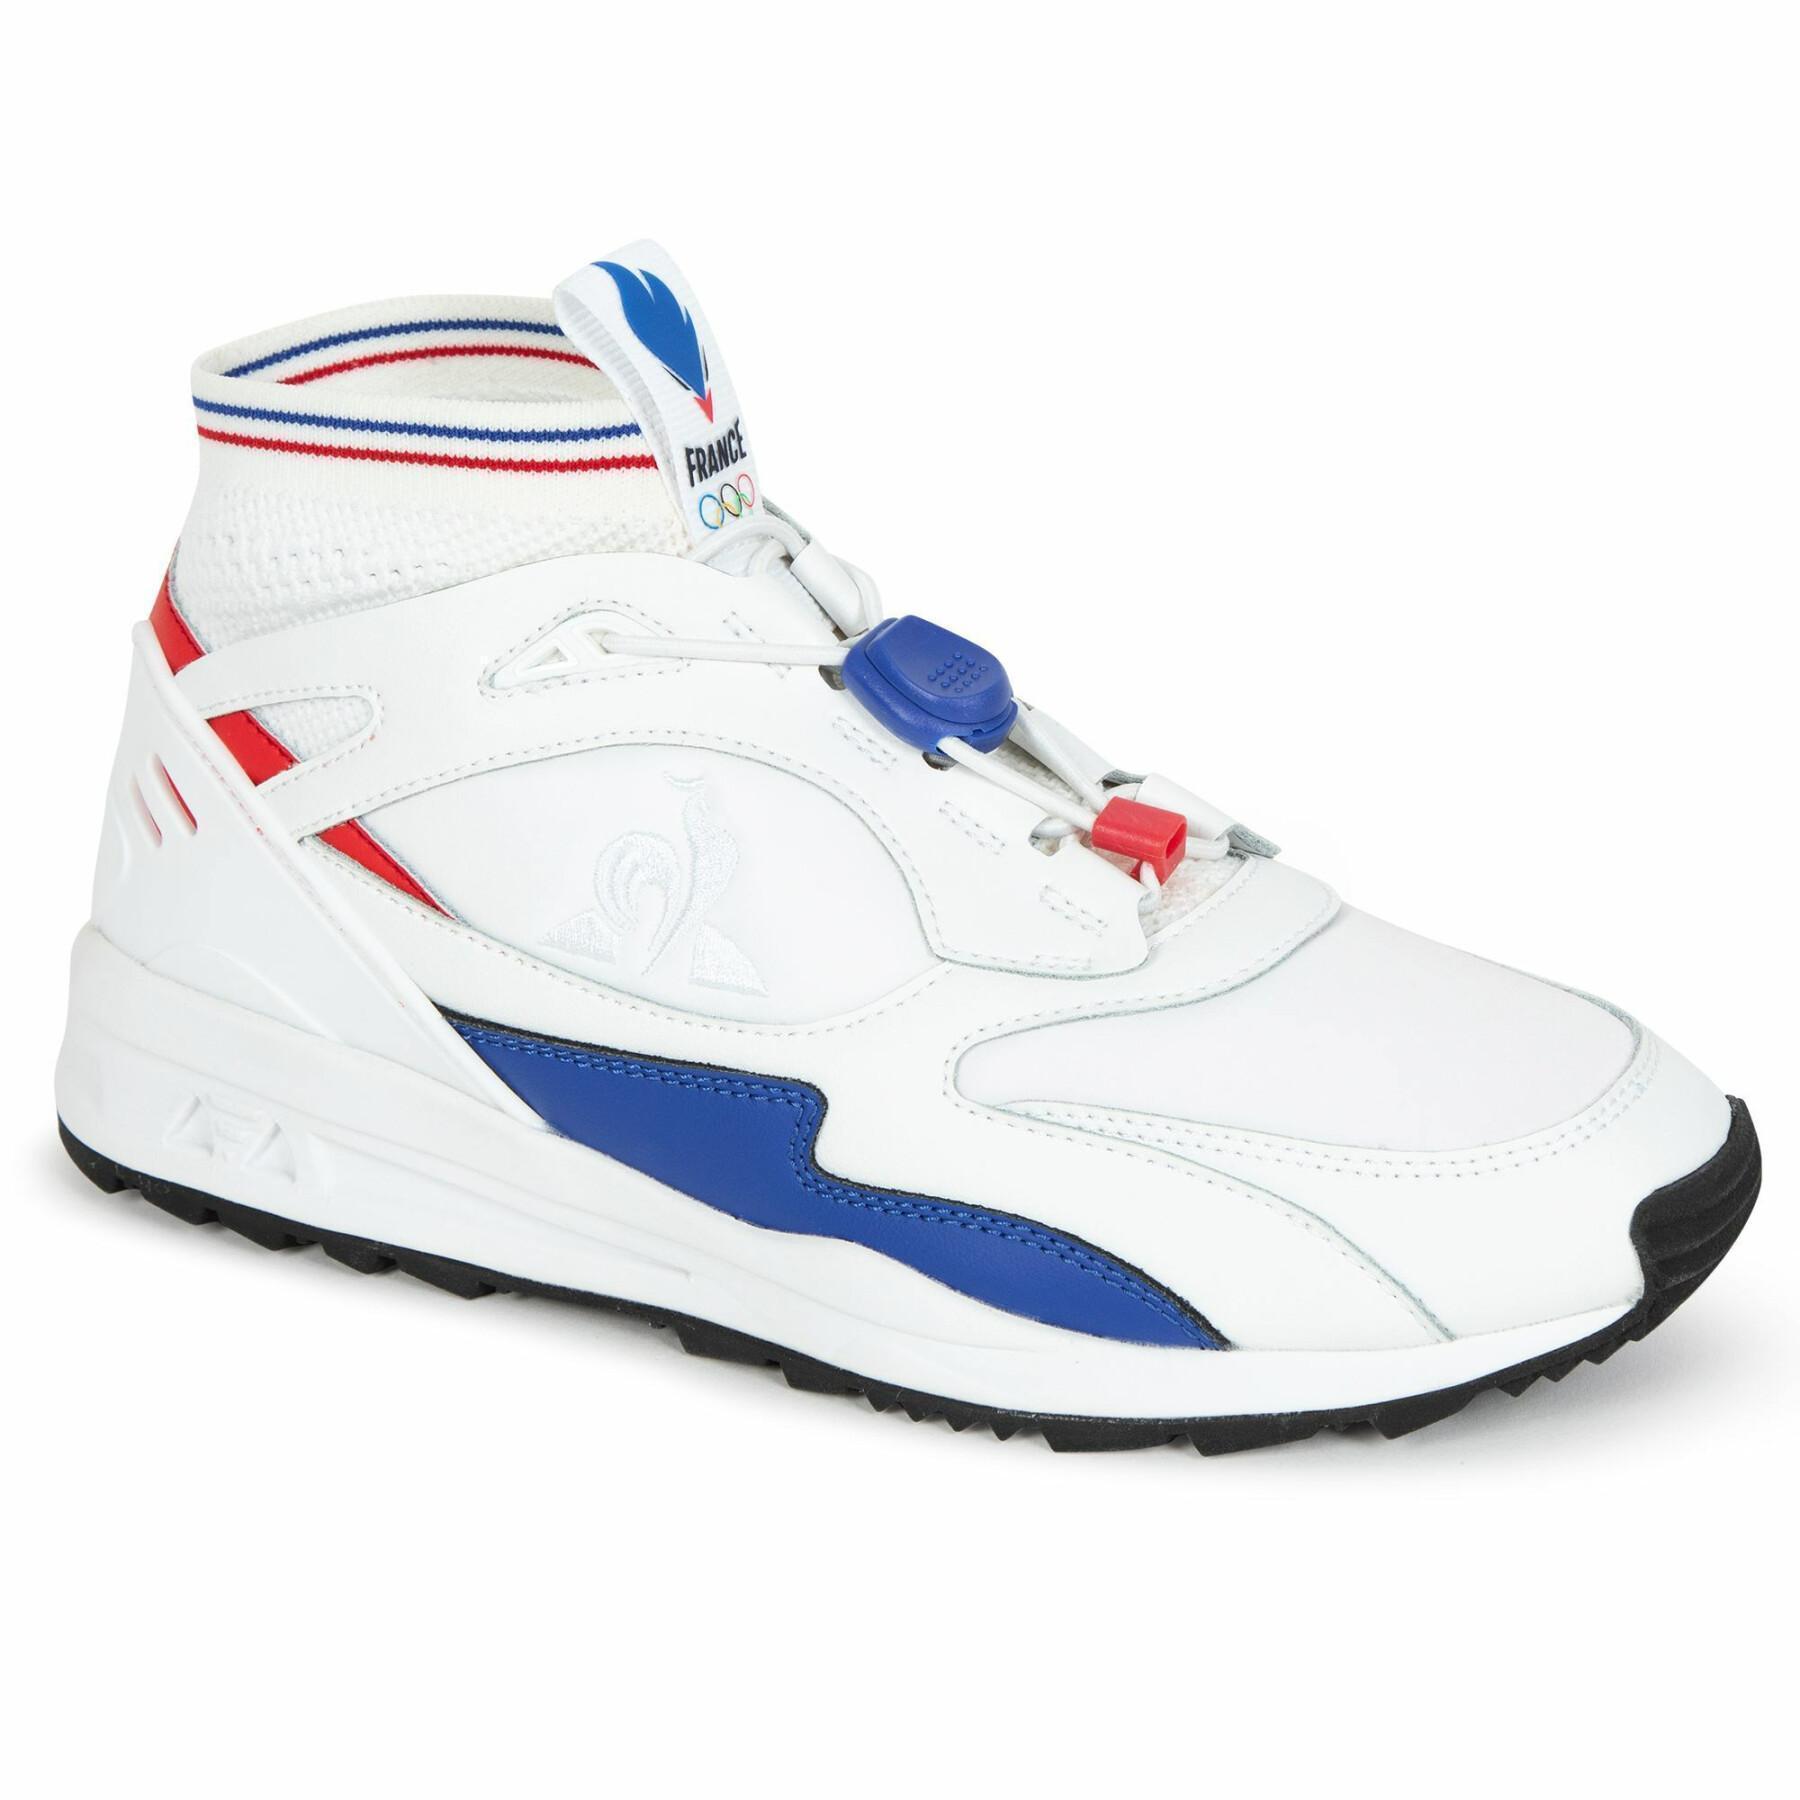 Zapatos France LCS R Trail Olympics